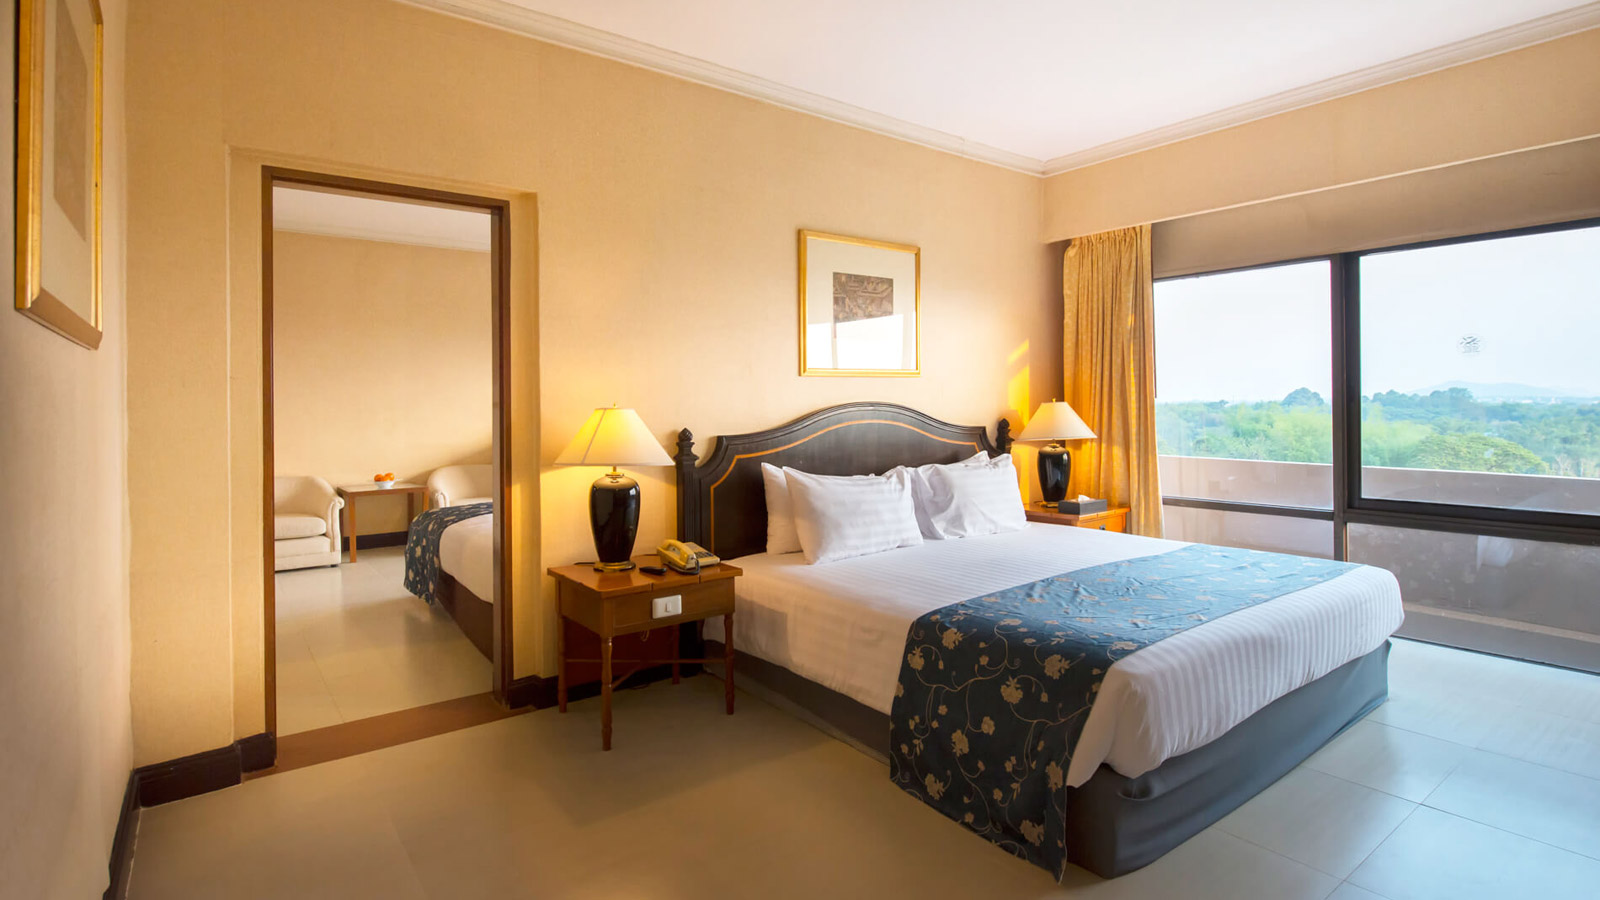 Junior Family Suites at Loei Palace Hotel - Loei Palace Hotel